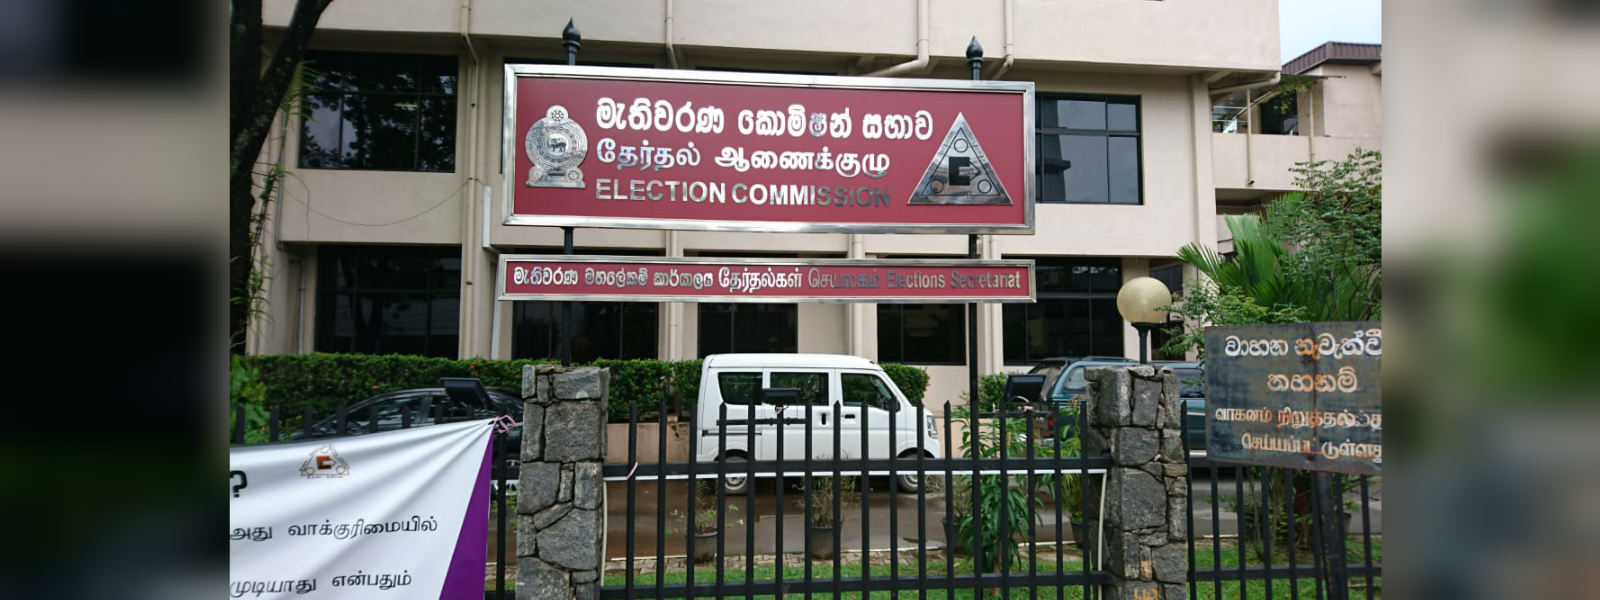 National Elections Commission officials meet today to discuss future elections